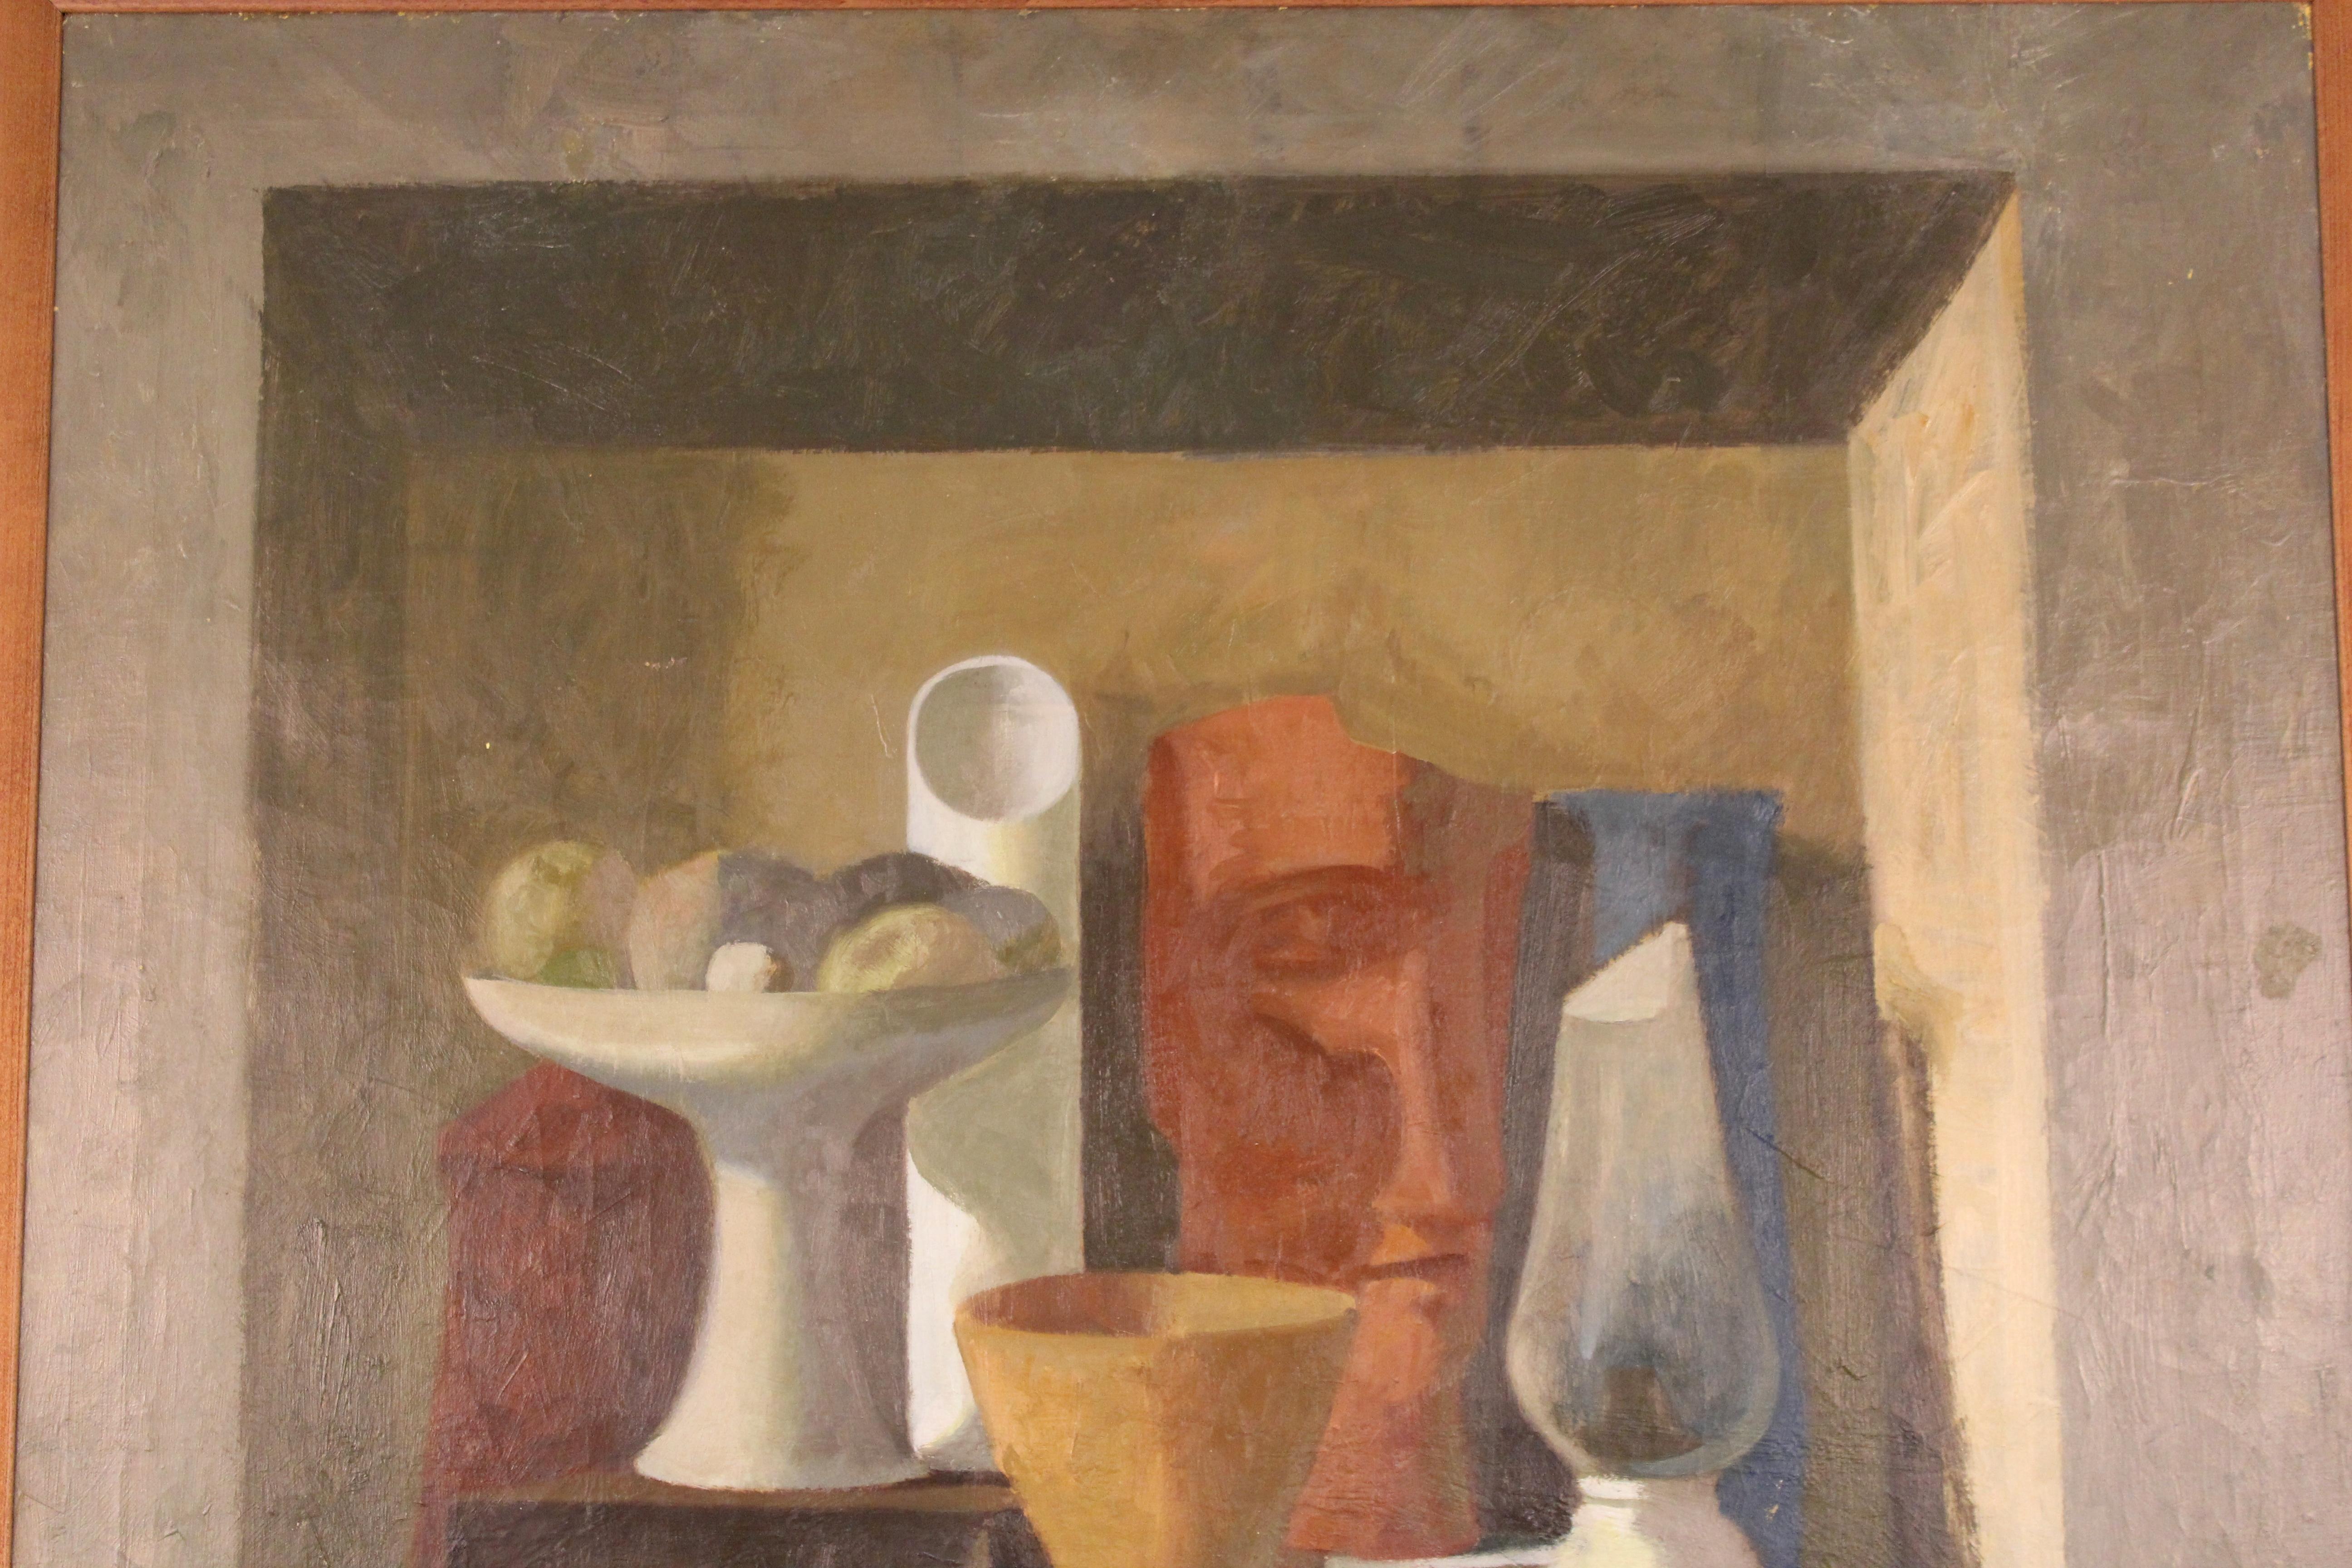 Modernist still life oil on canvas painting created by Italian-American artist Enzo Russo (Born 1936 in Florence, Italy). Russo and his twin brother Germano both received a traditional artistic education at the School of Fine Arts in Florence,